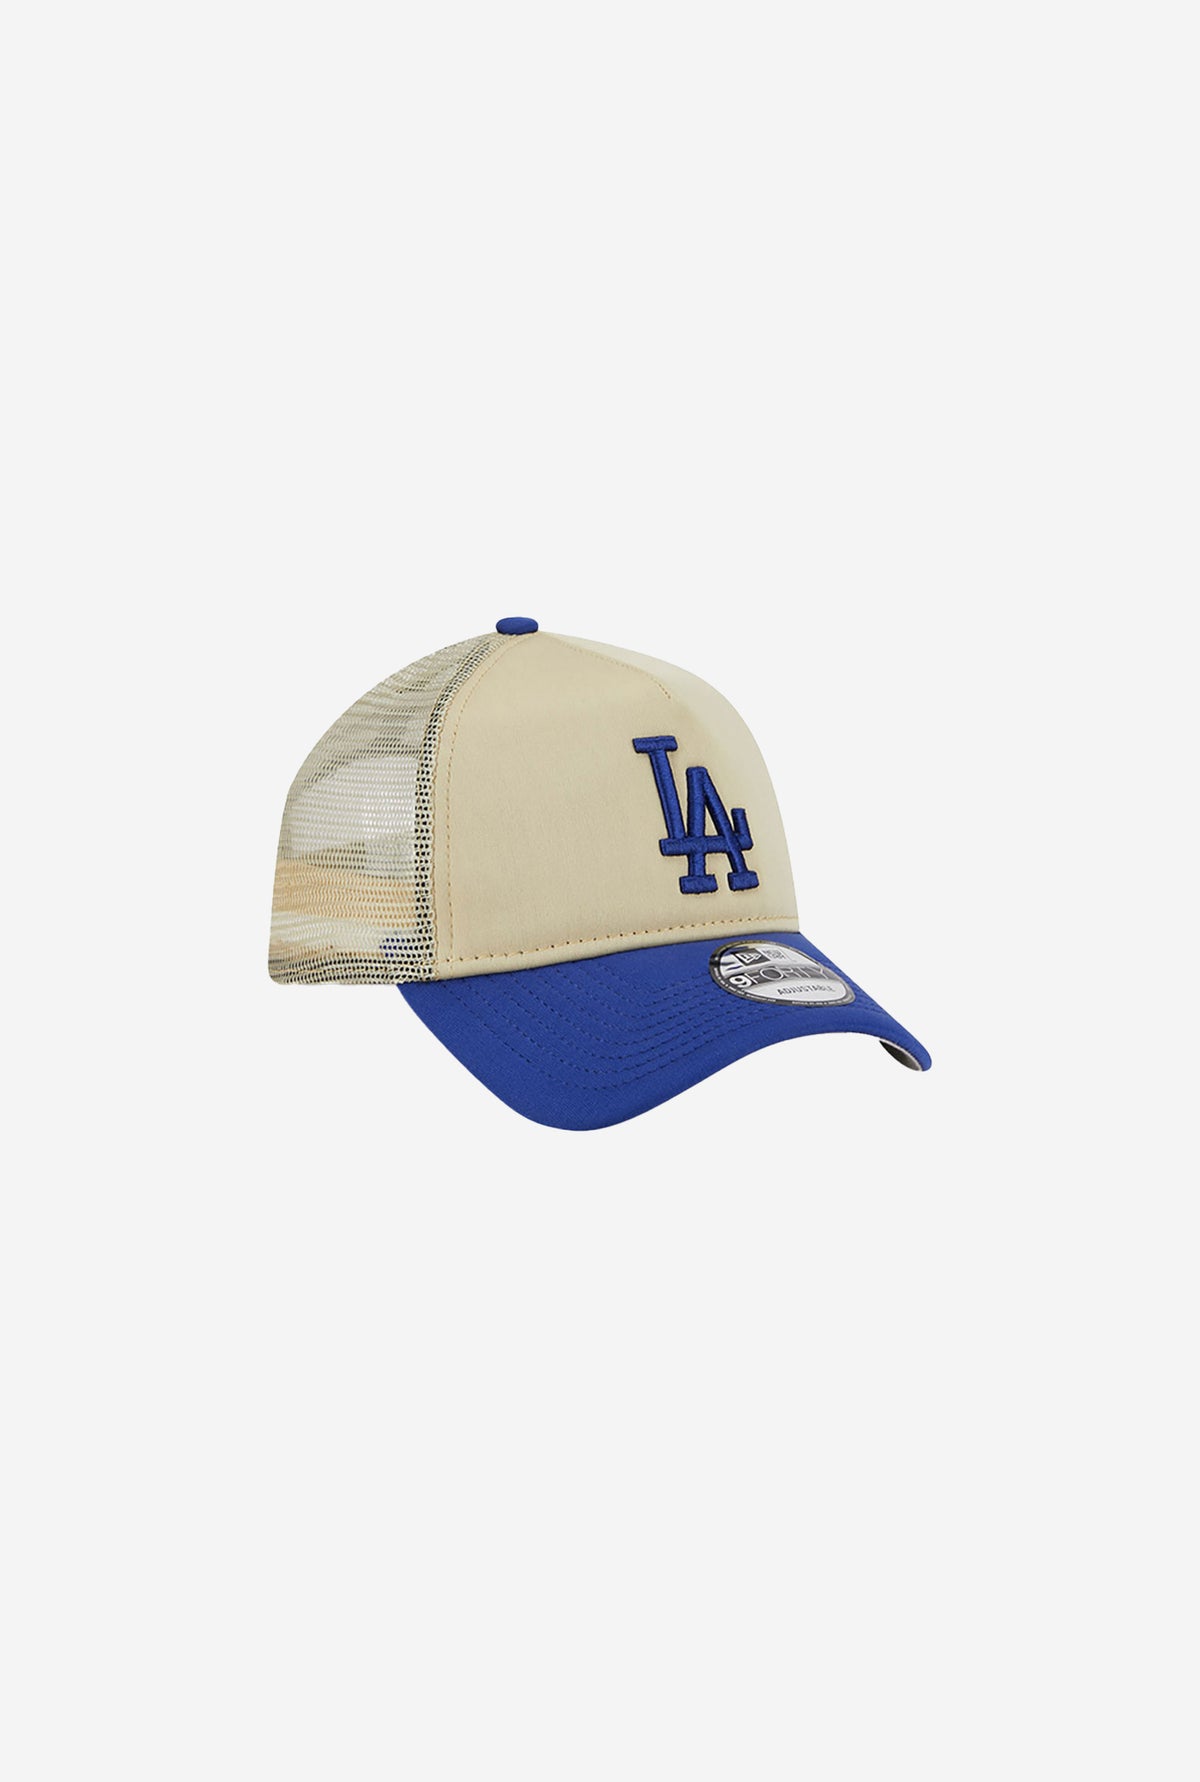 Los Angeles Dodgers 9FORTY A-Frame OTC Trucker